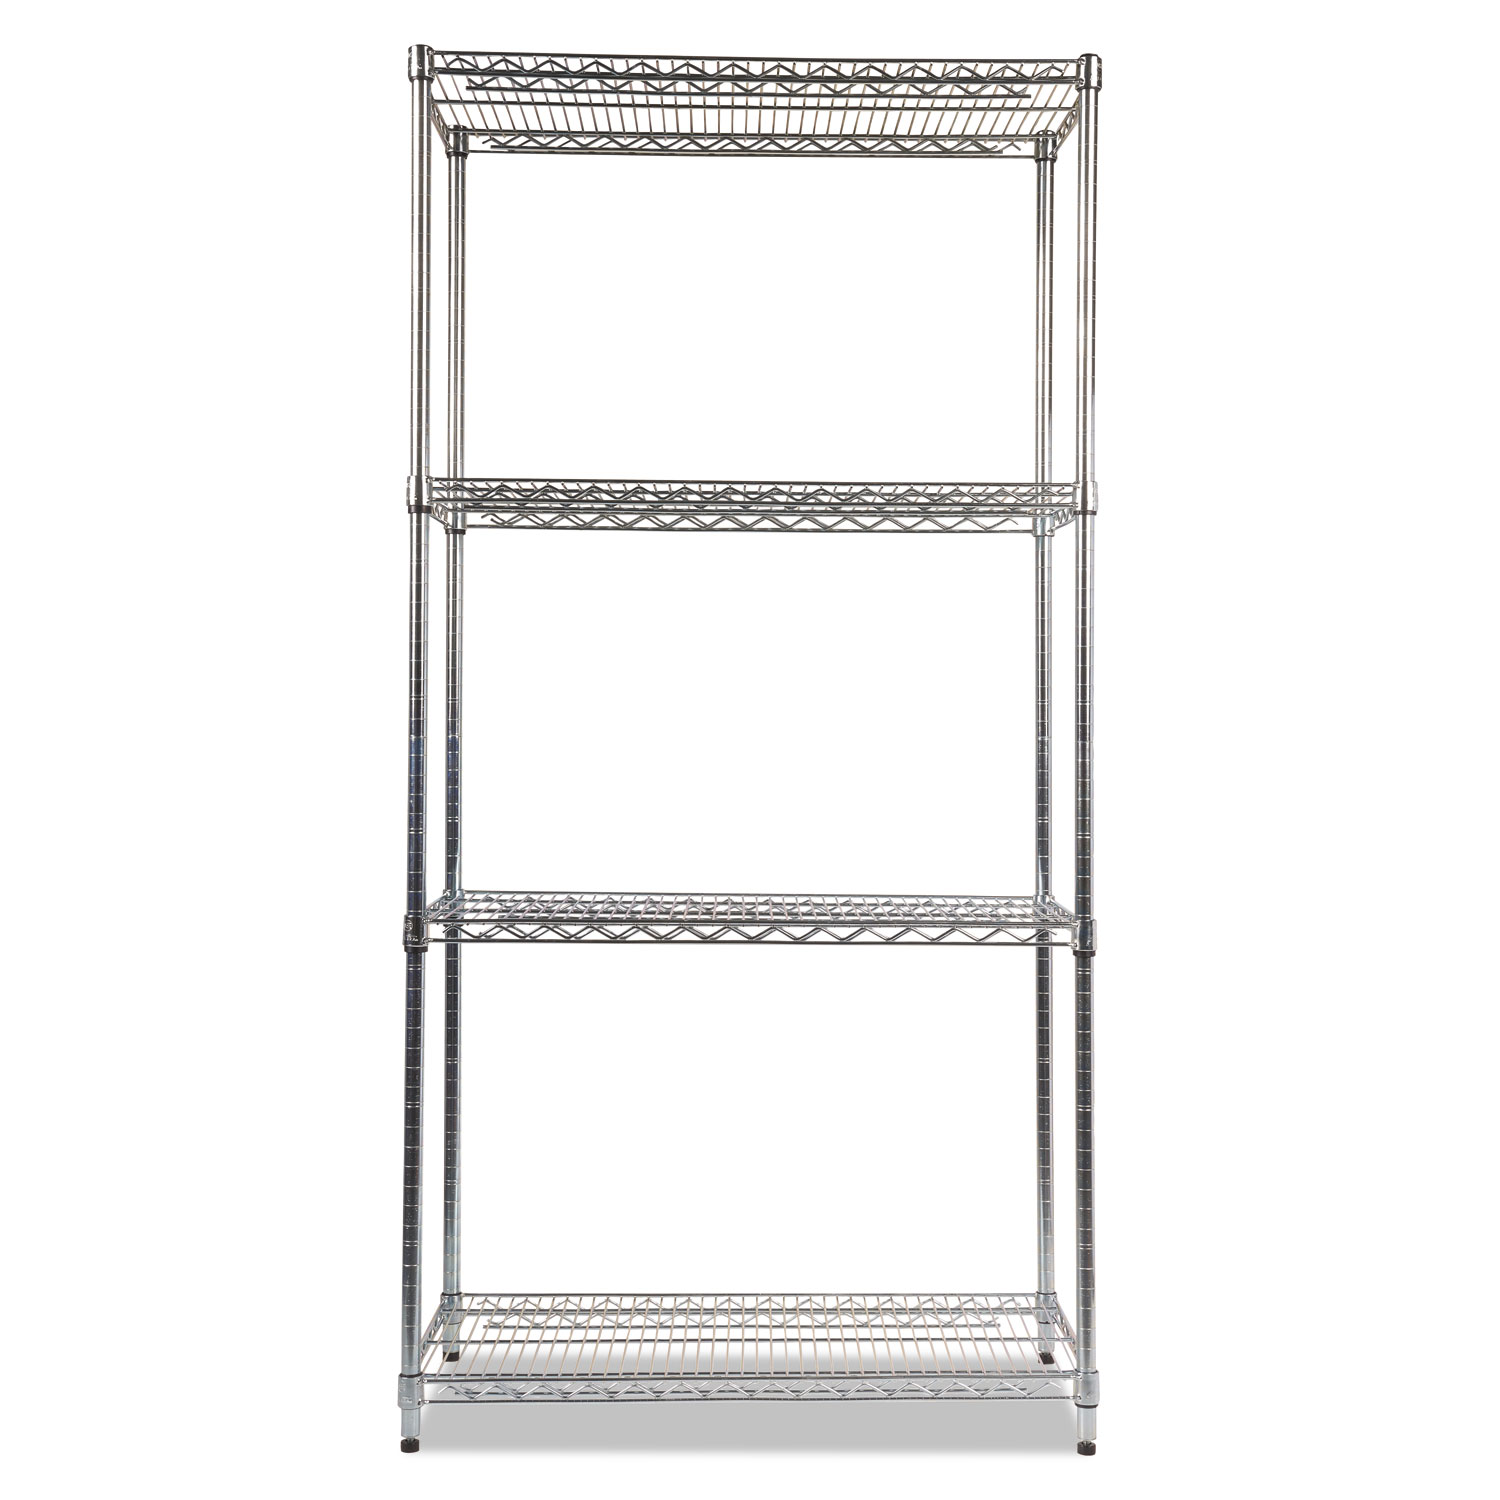 Alera Shelf Liners For Wire Shelving, Clear Plastic, 36w x 18d, 4